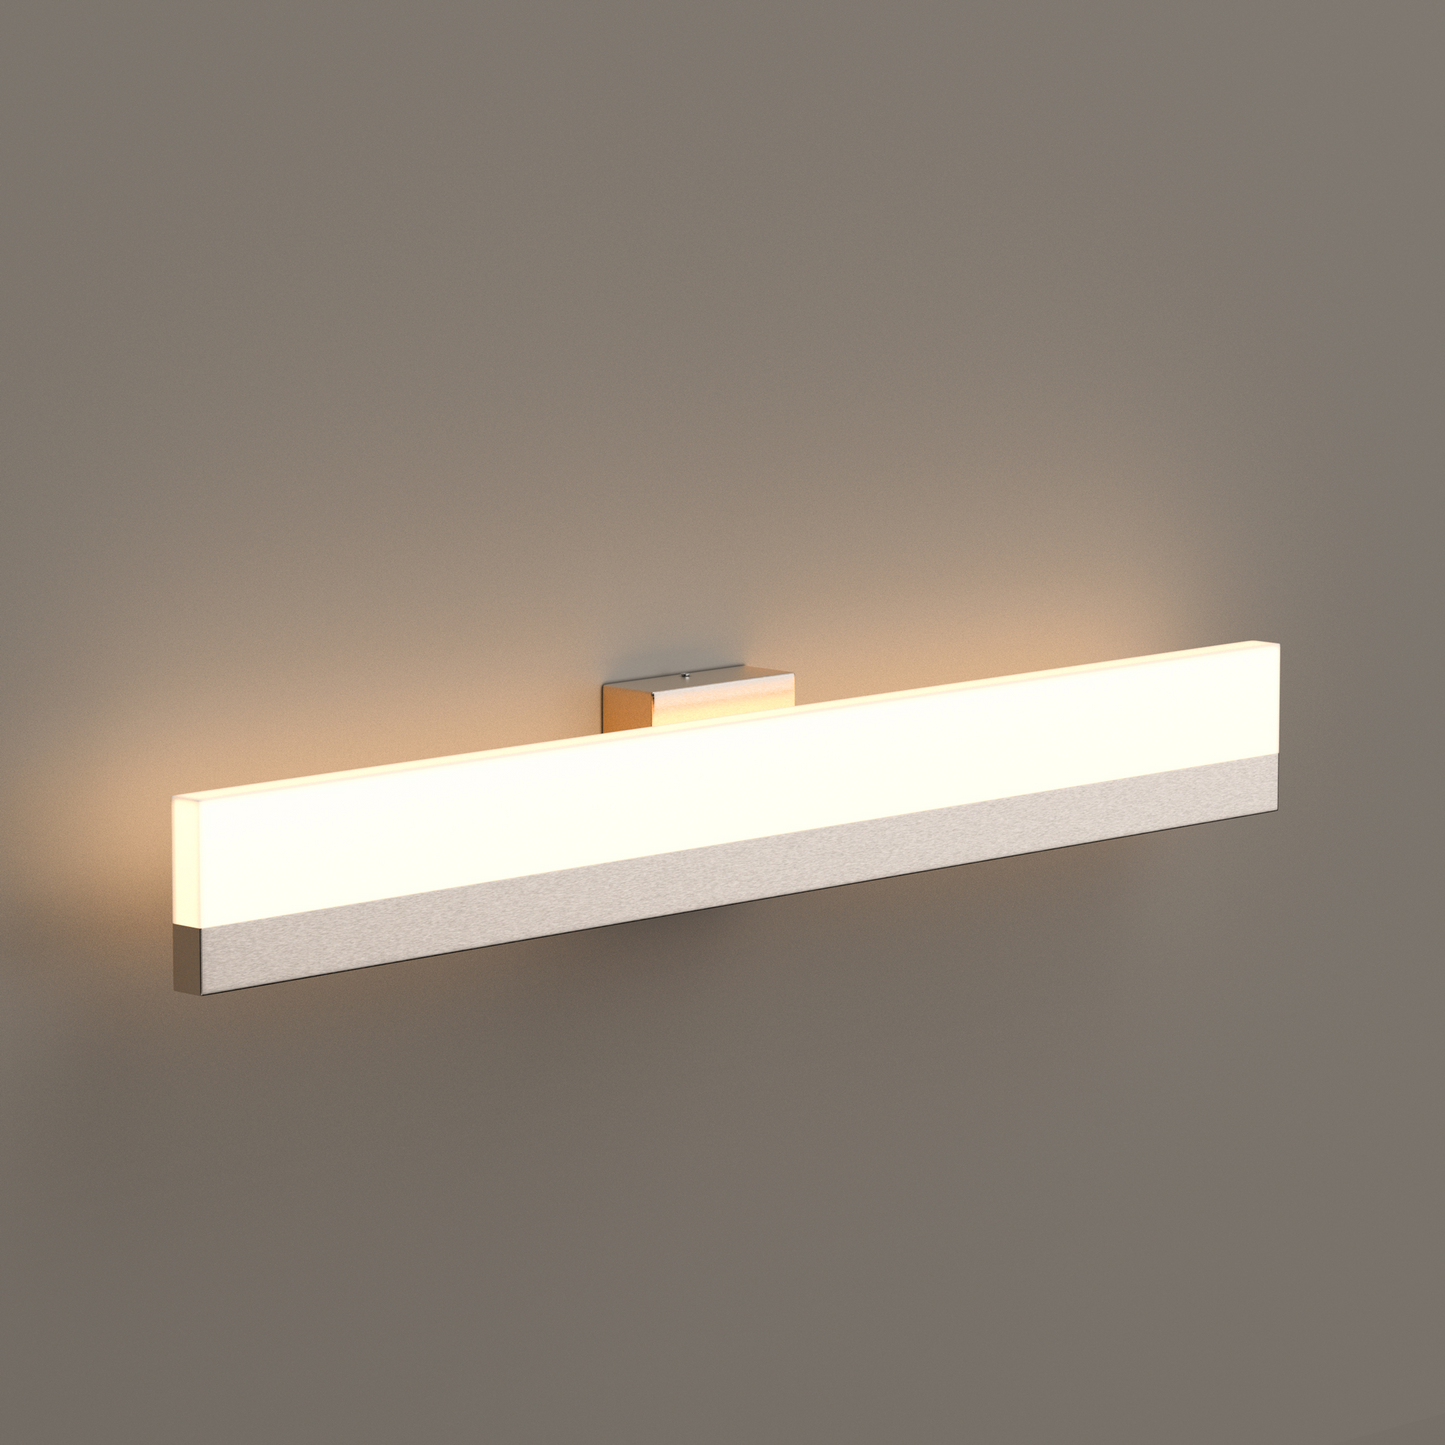 Bathroom Light Fixtures, 4000K (Cool White), Brushed Nickel Finish, For Damp Location,Wall Mount, Vanity Lighting